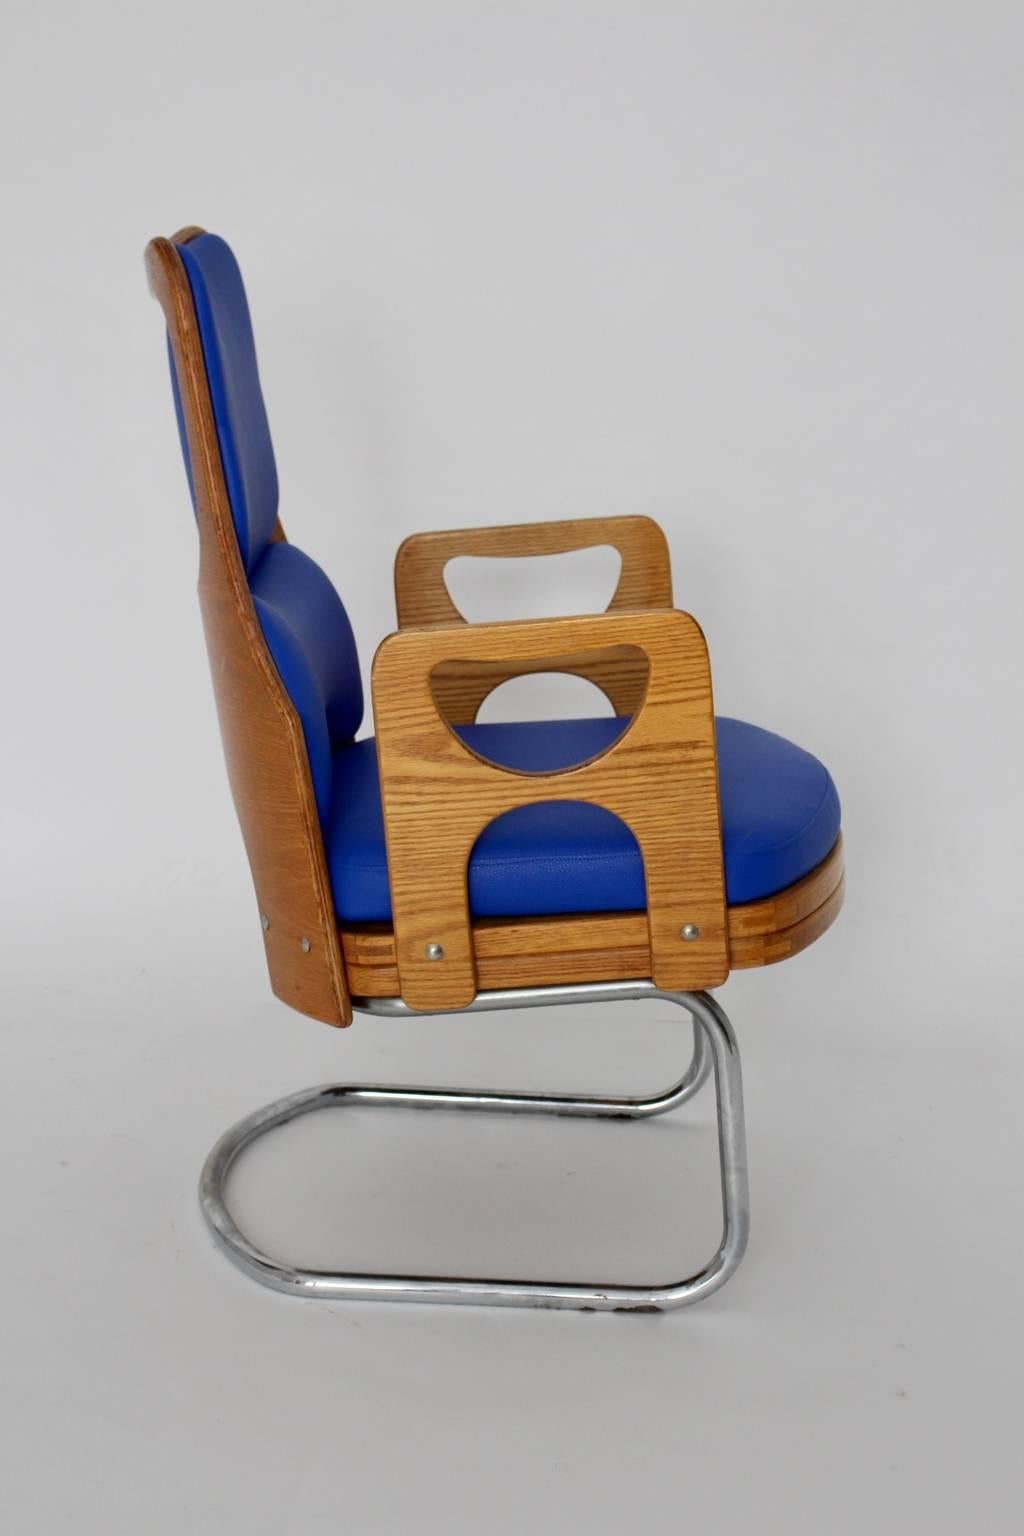 Space Age Blue Vintage Teak Armchair or Lounge Chair 1960s For Sale 1